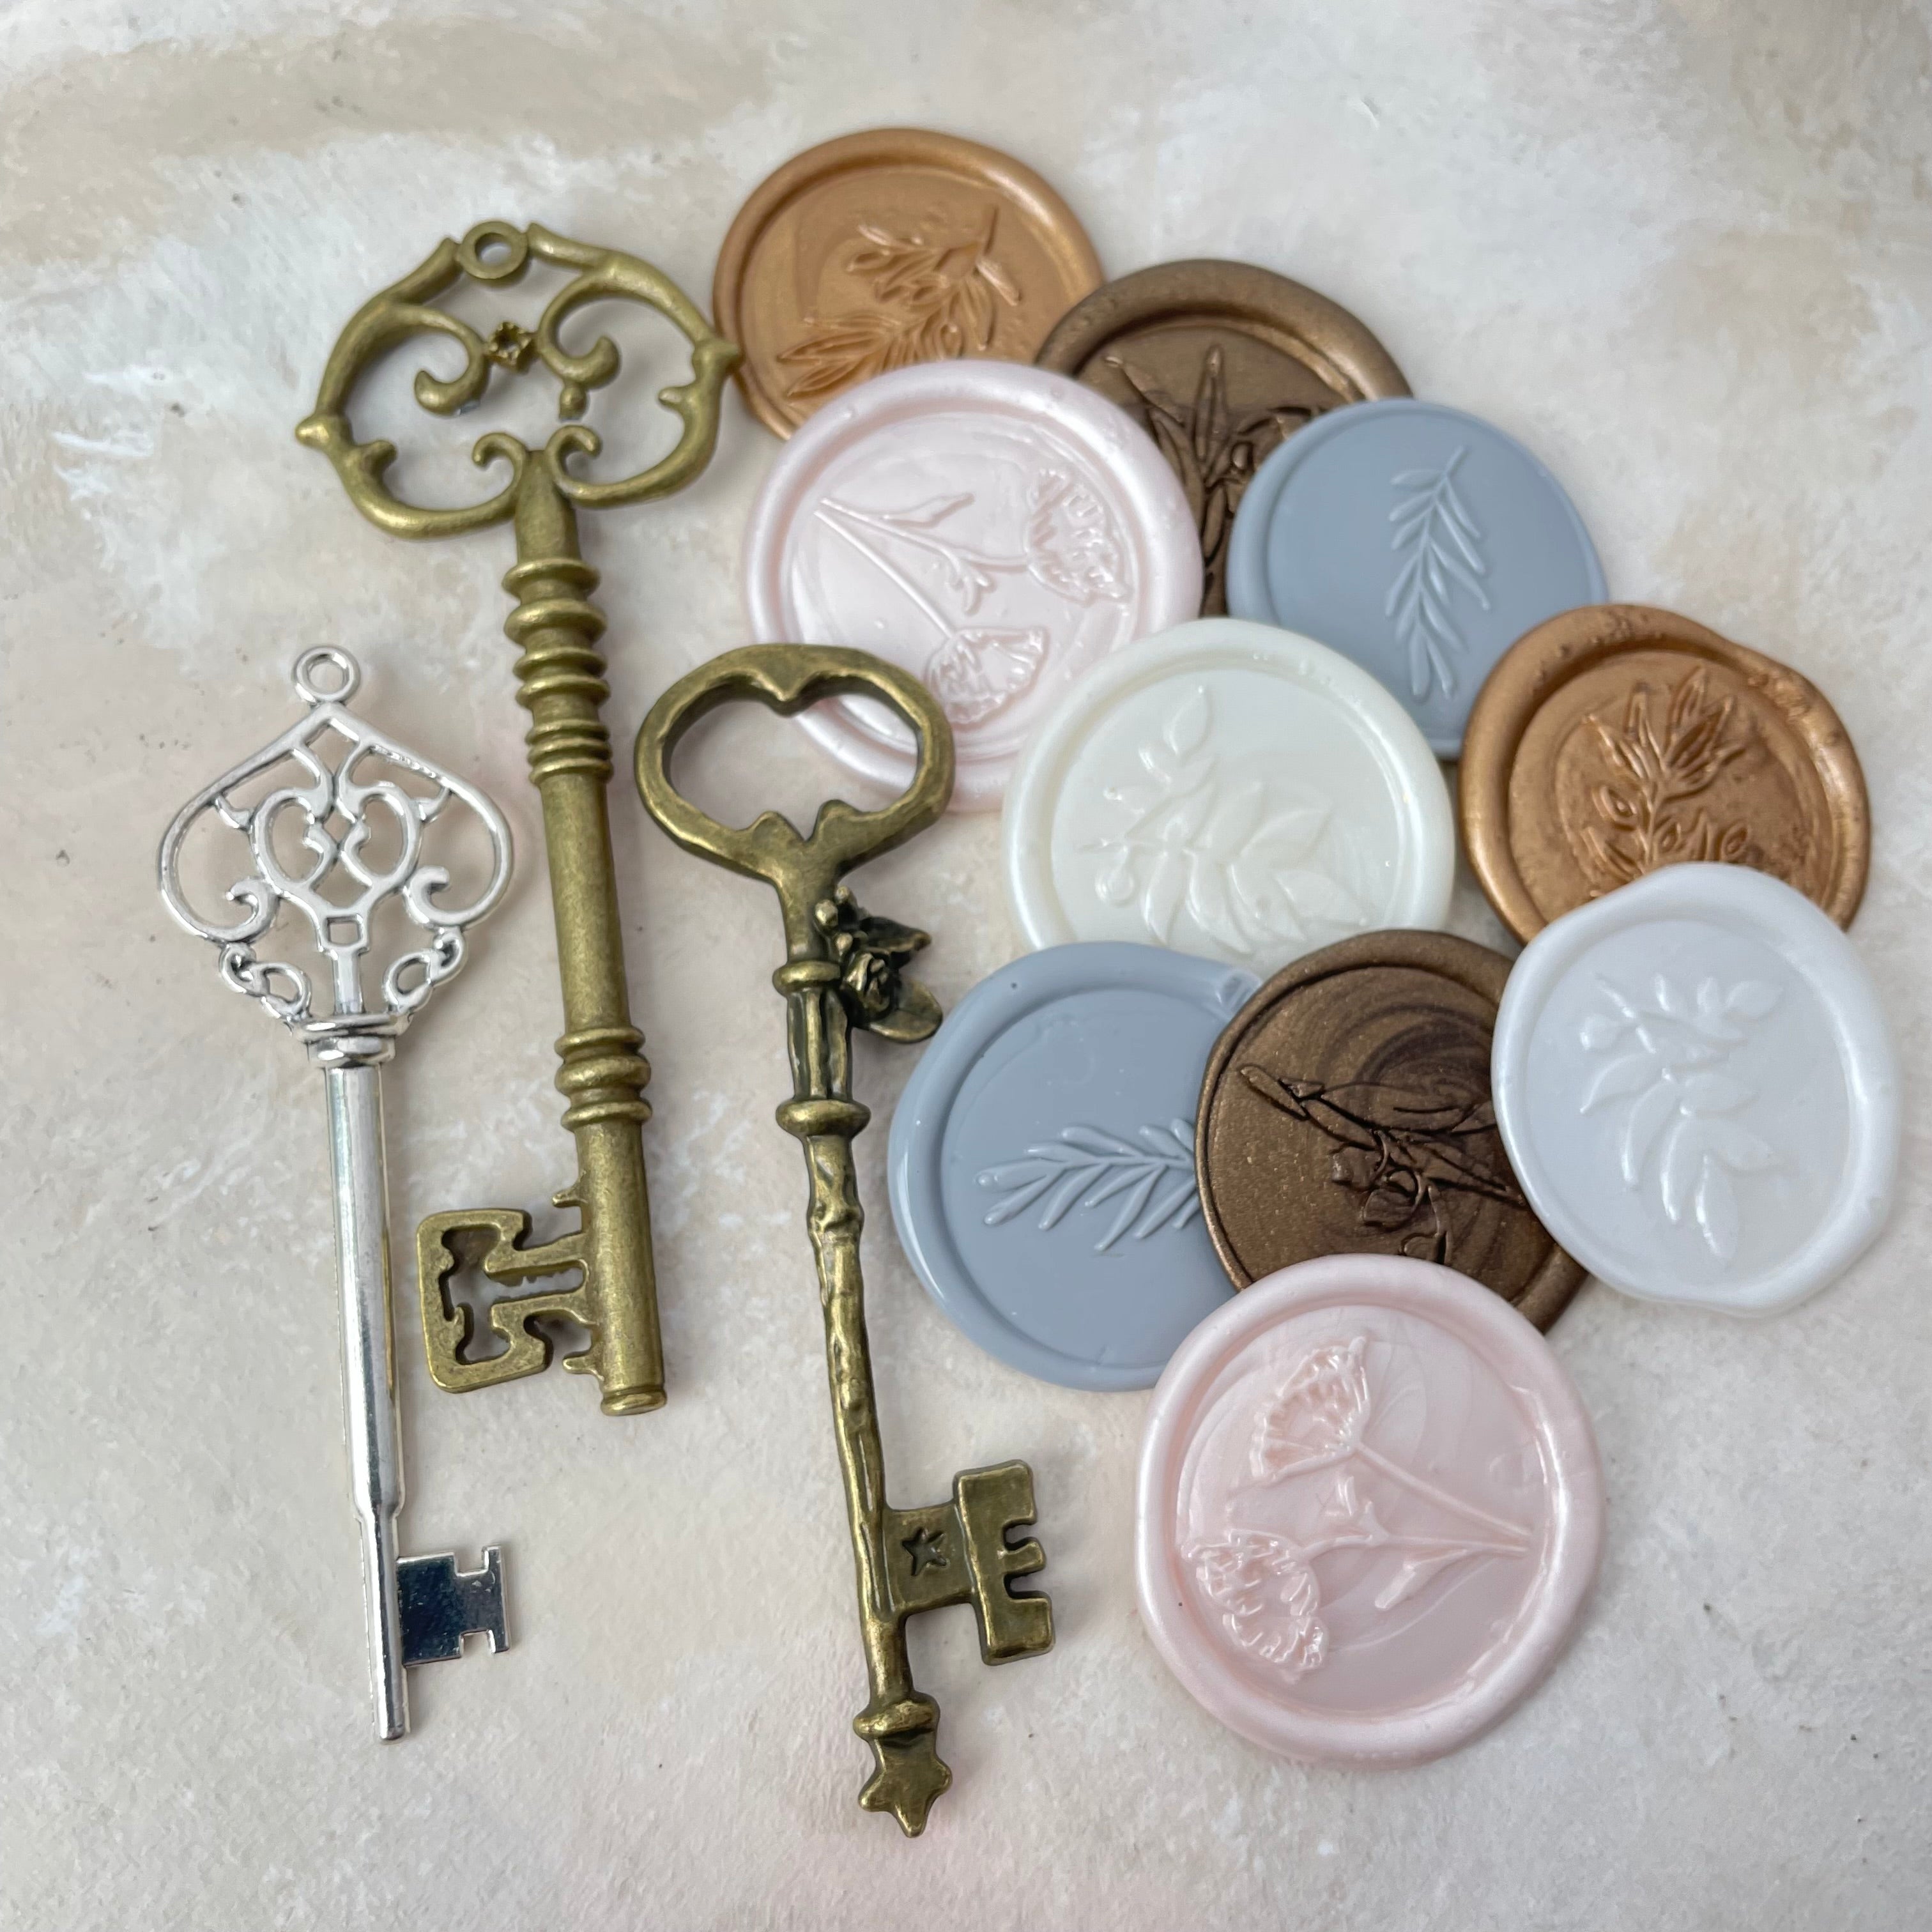 3 keys, gold, bronze and silver and 10 classic wax seals - Wedding Flat lay props from Champagne & GRIT